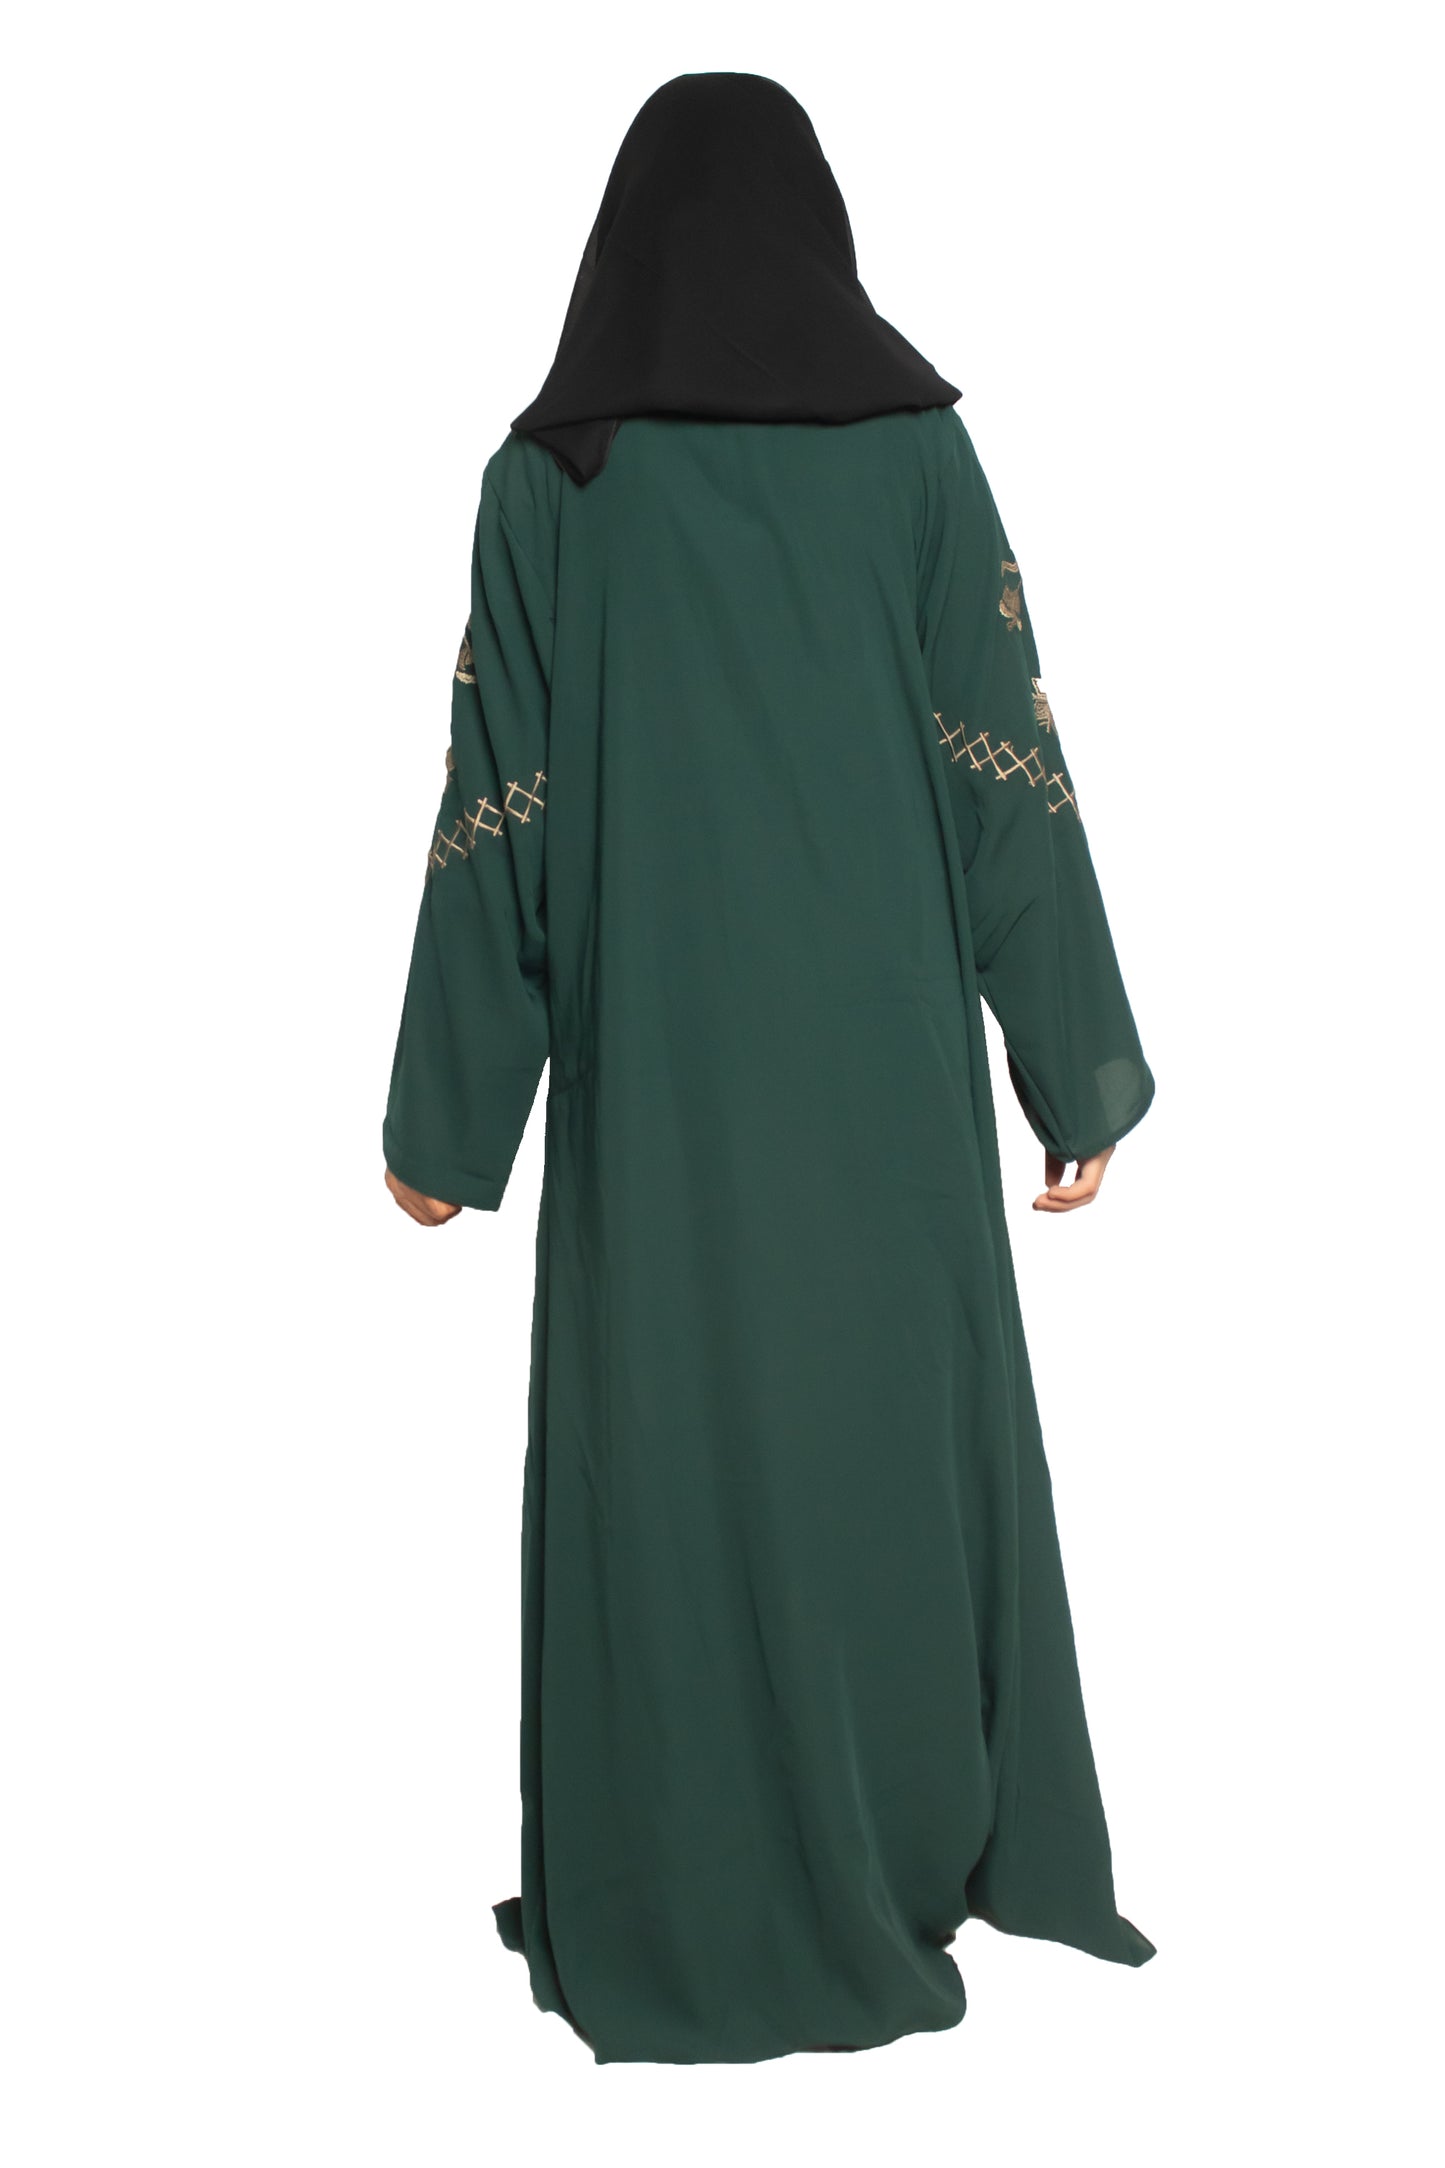 Modest City Self Design Front Open Zip Embroidered Bottle Green Crepe Fabric Abaya or Burqa with Hijab for Women & Girls-Series Laiba